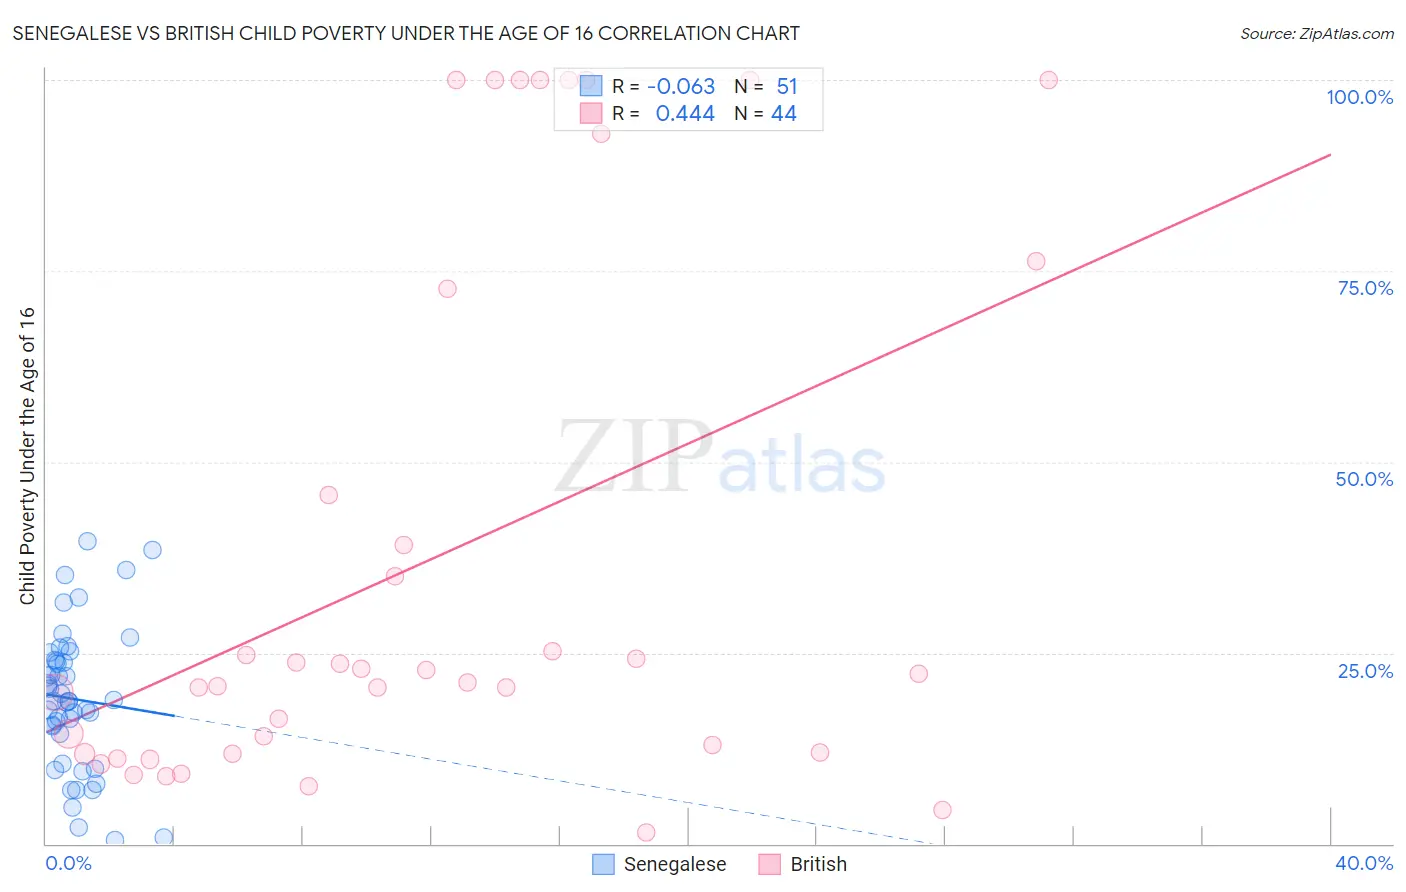 Senegalese vs British Child Poverty Under the Age of 16